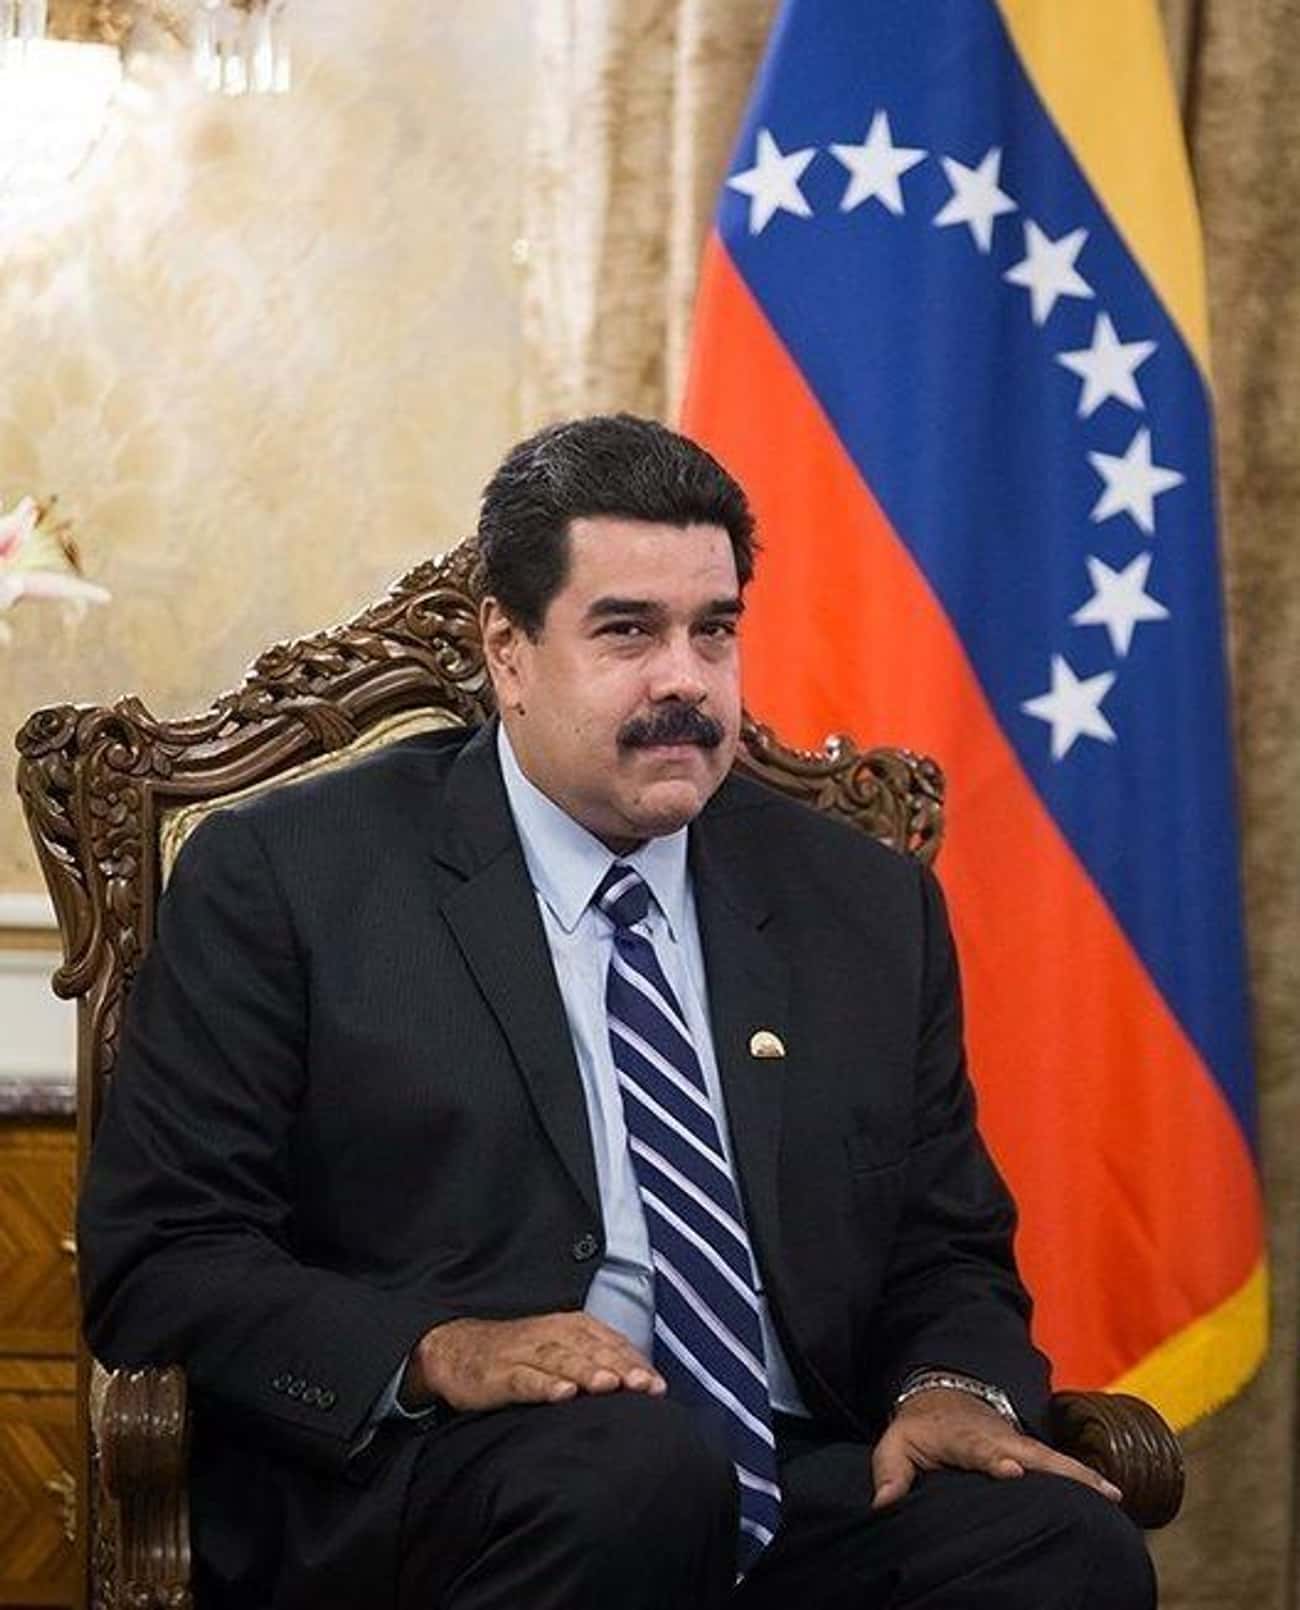 The Vatican Supports Free Elections in Venezuela Over Maduro's Presidency